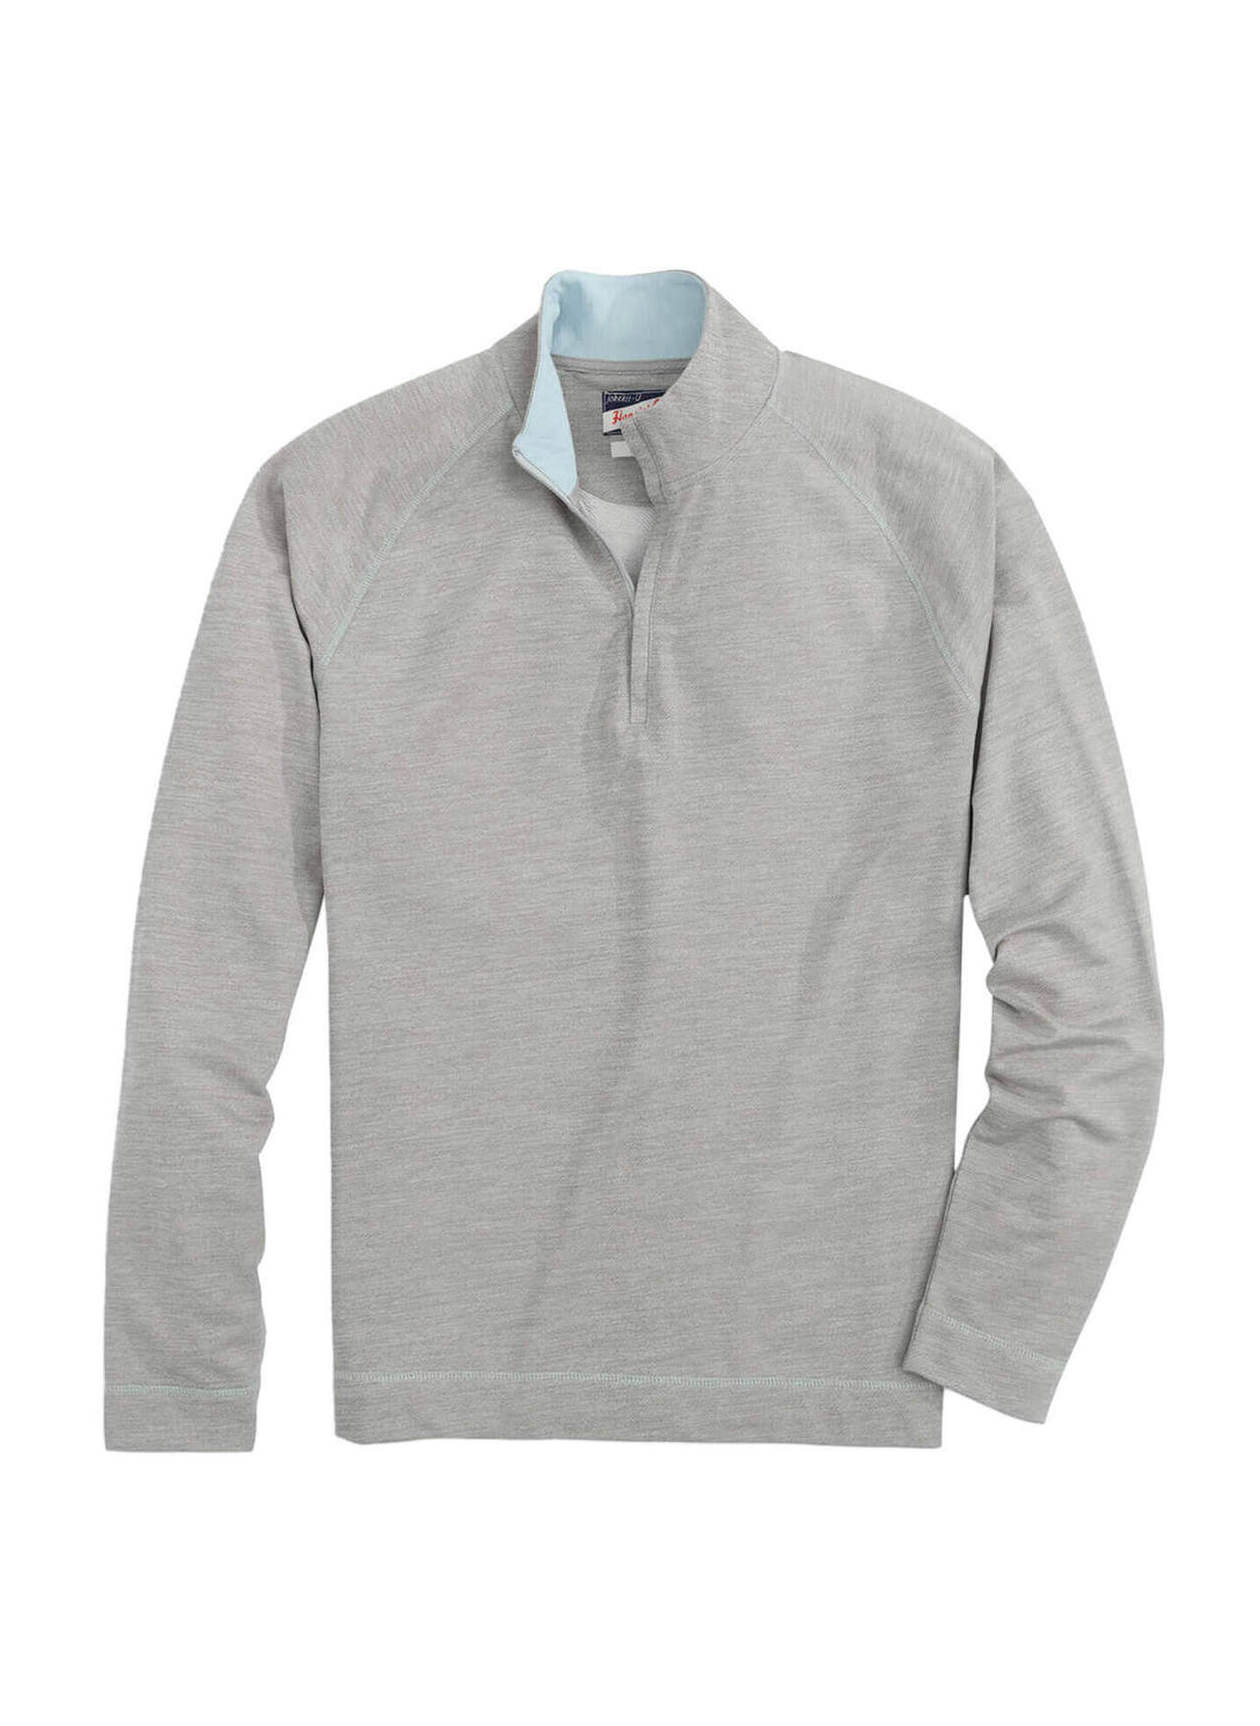 Embroidered Johnnie-O Men's Quarry Bannister Heathered Quarter-Zip ...